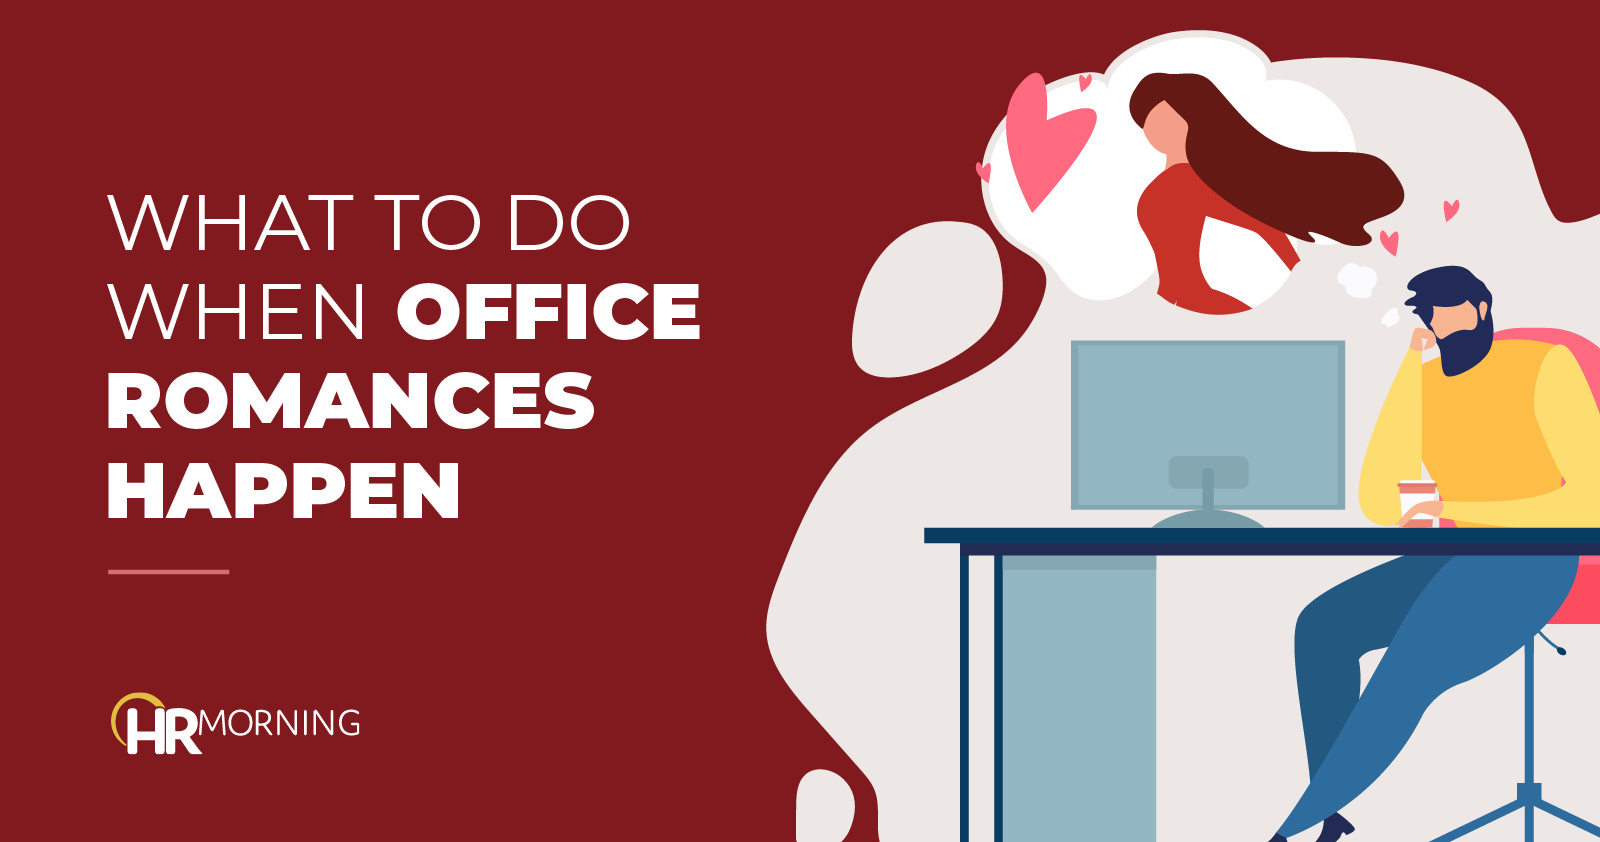 Office romances happen: Here’s how to make them a proper company affair